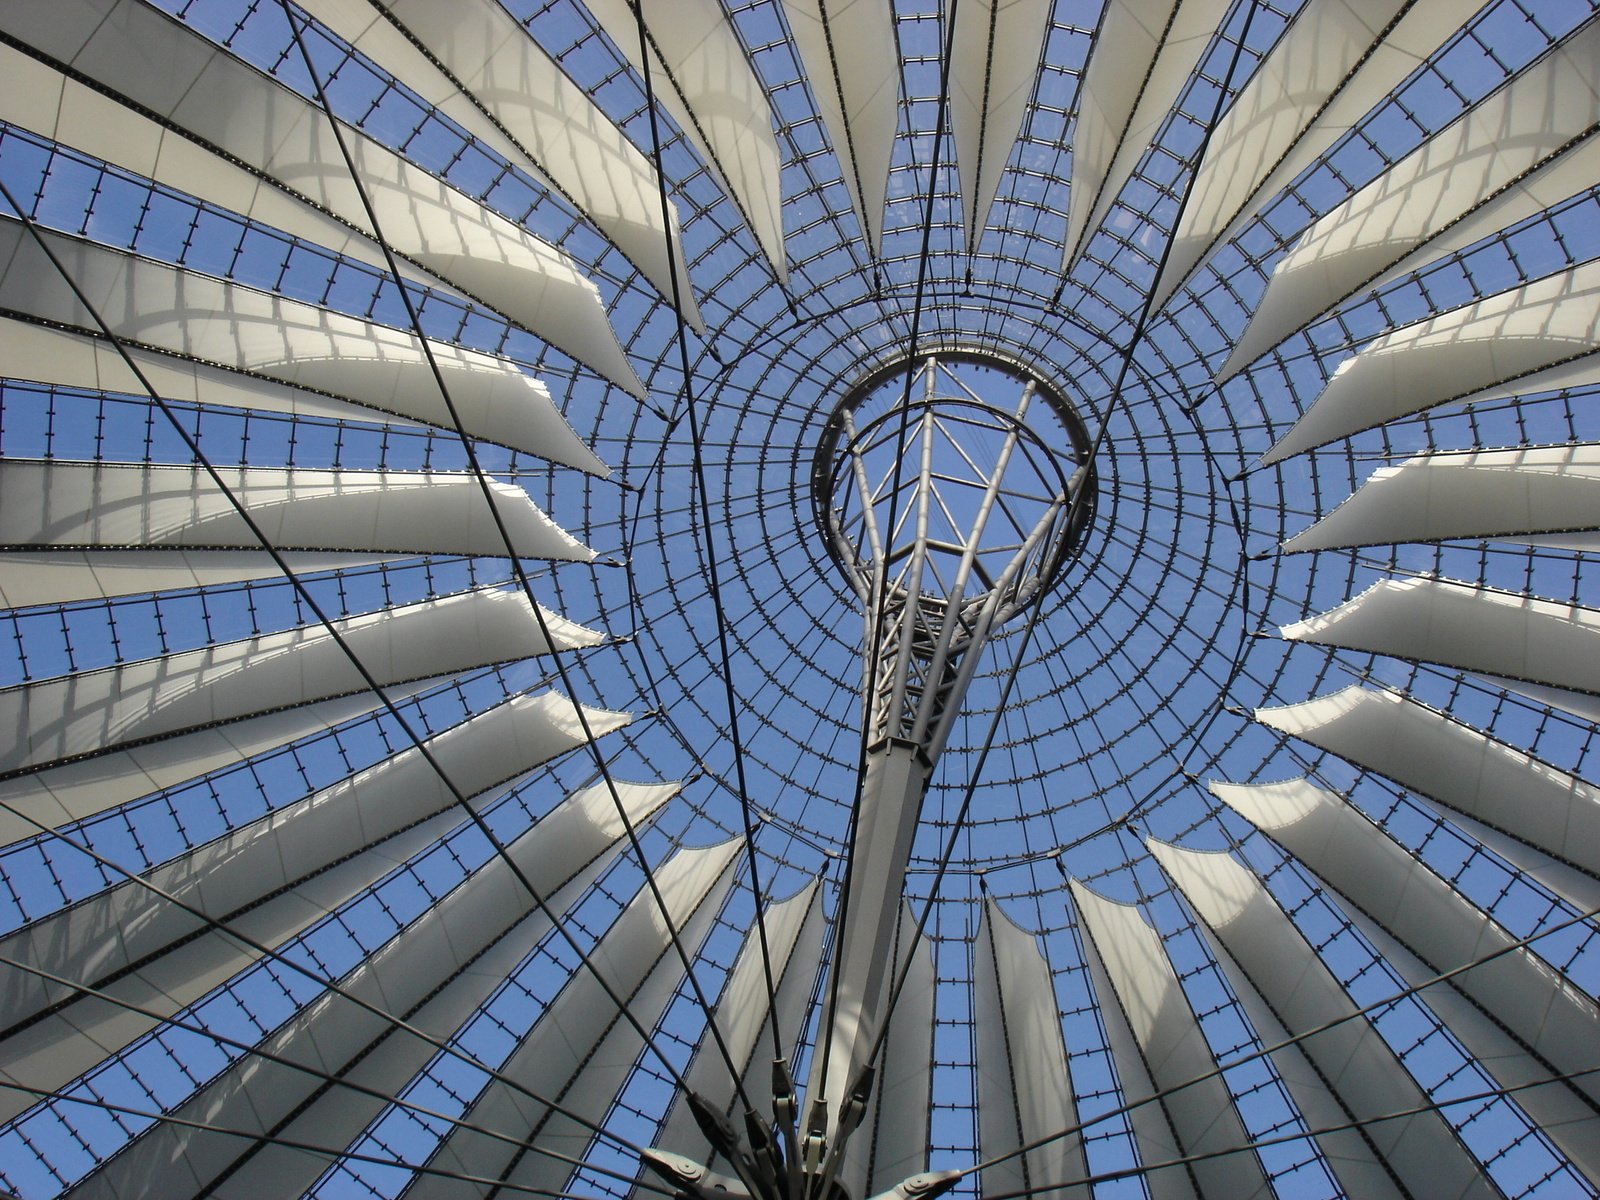 looking up at the roof of a circular building with large glass panels